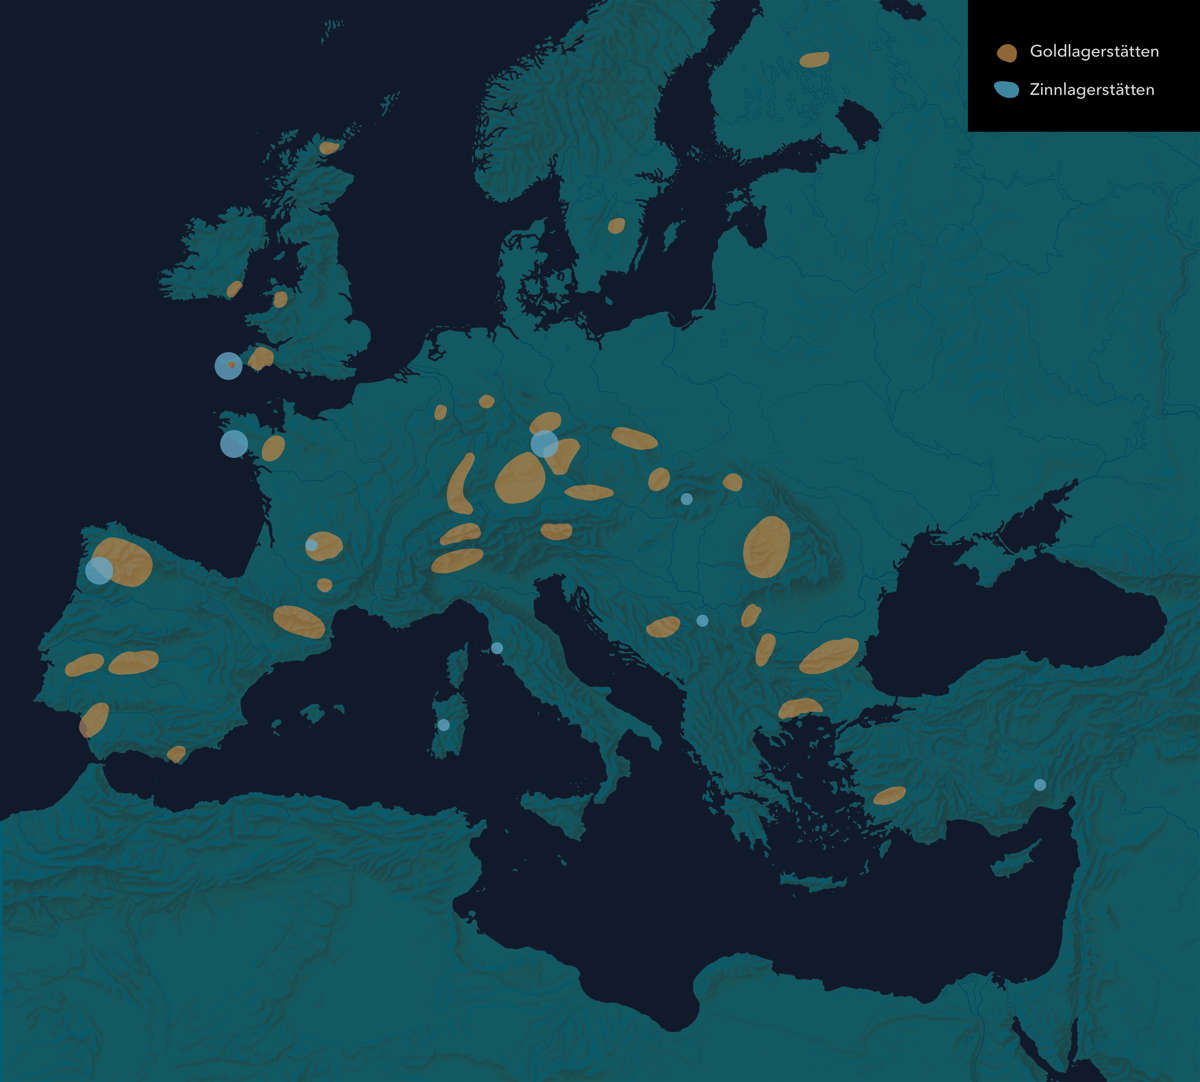 Distribution of gold and tin deposits in Europe.